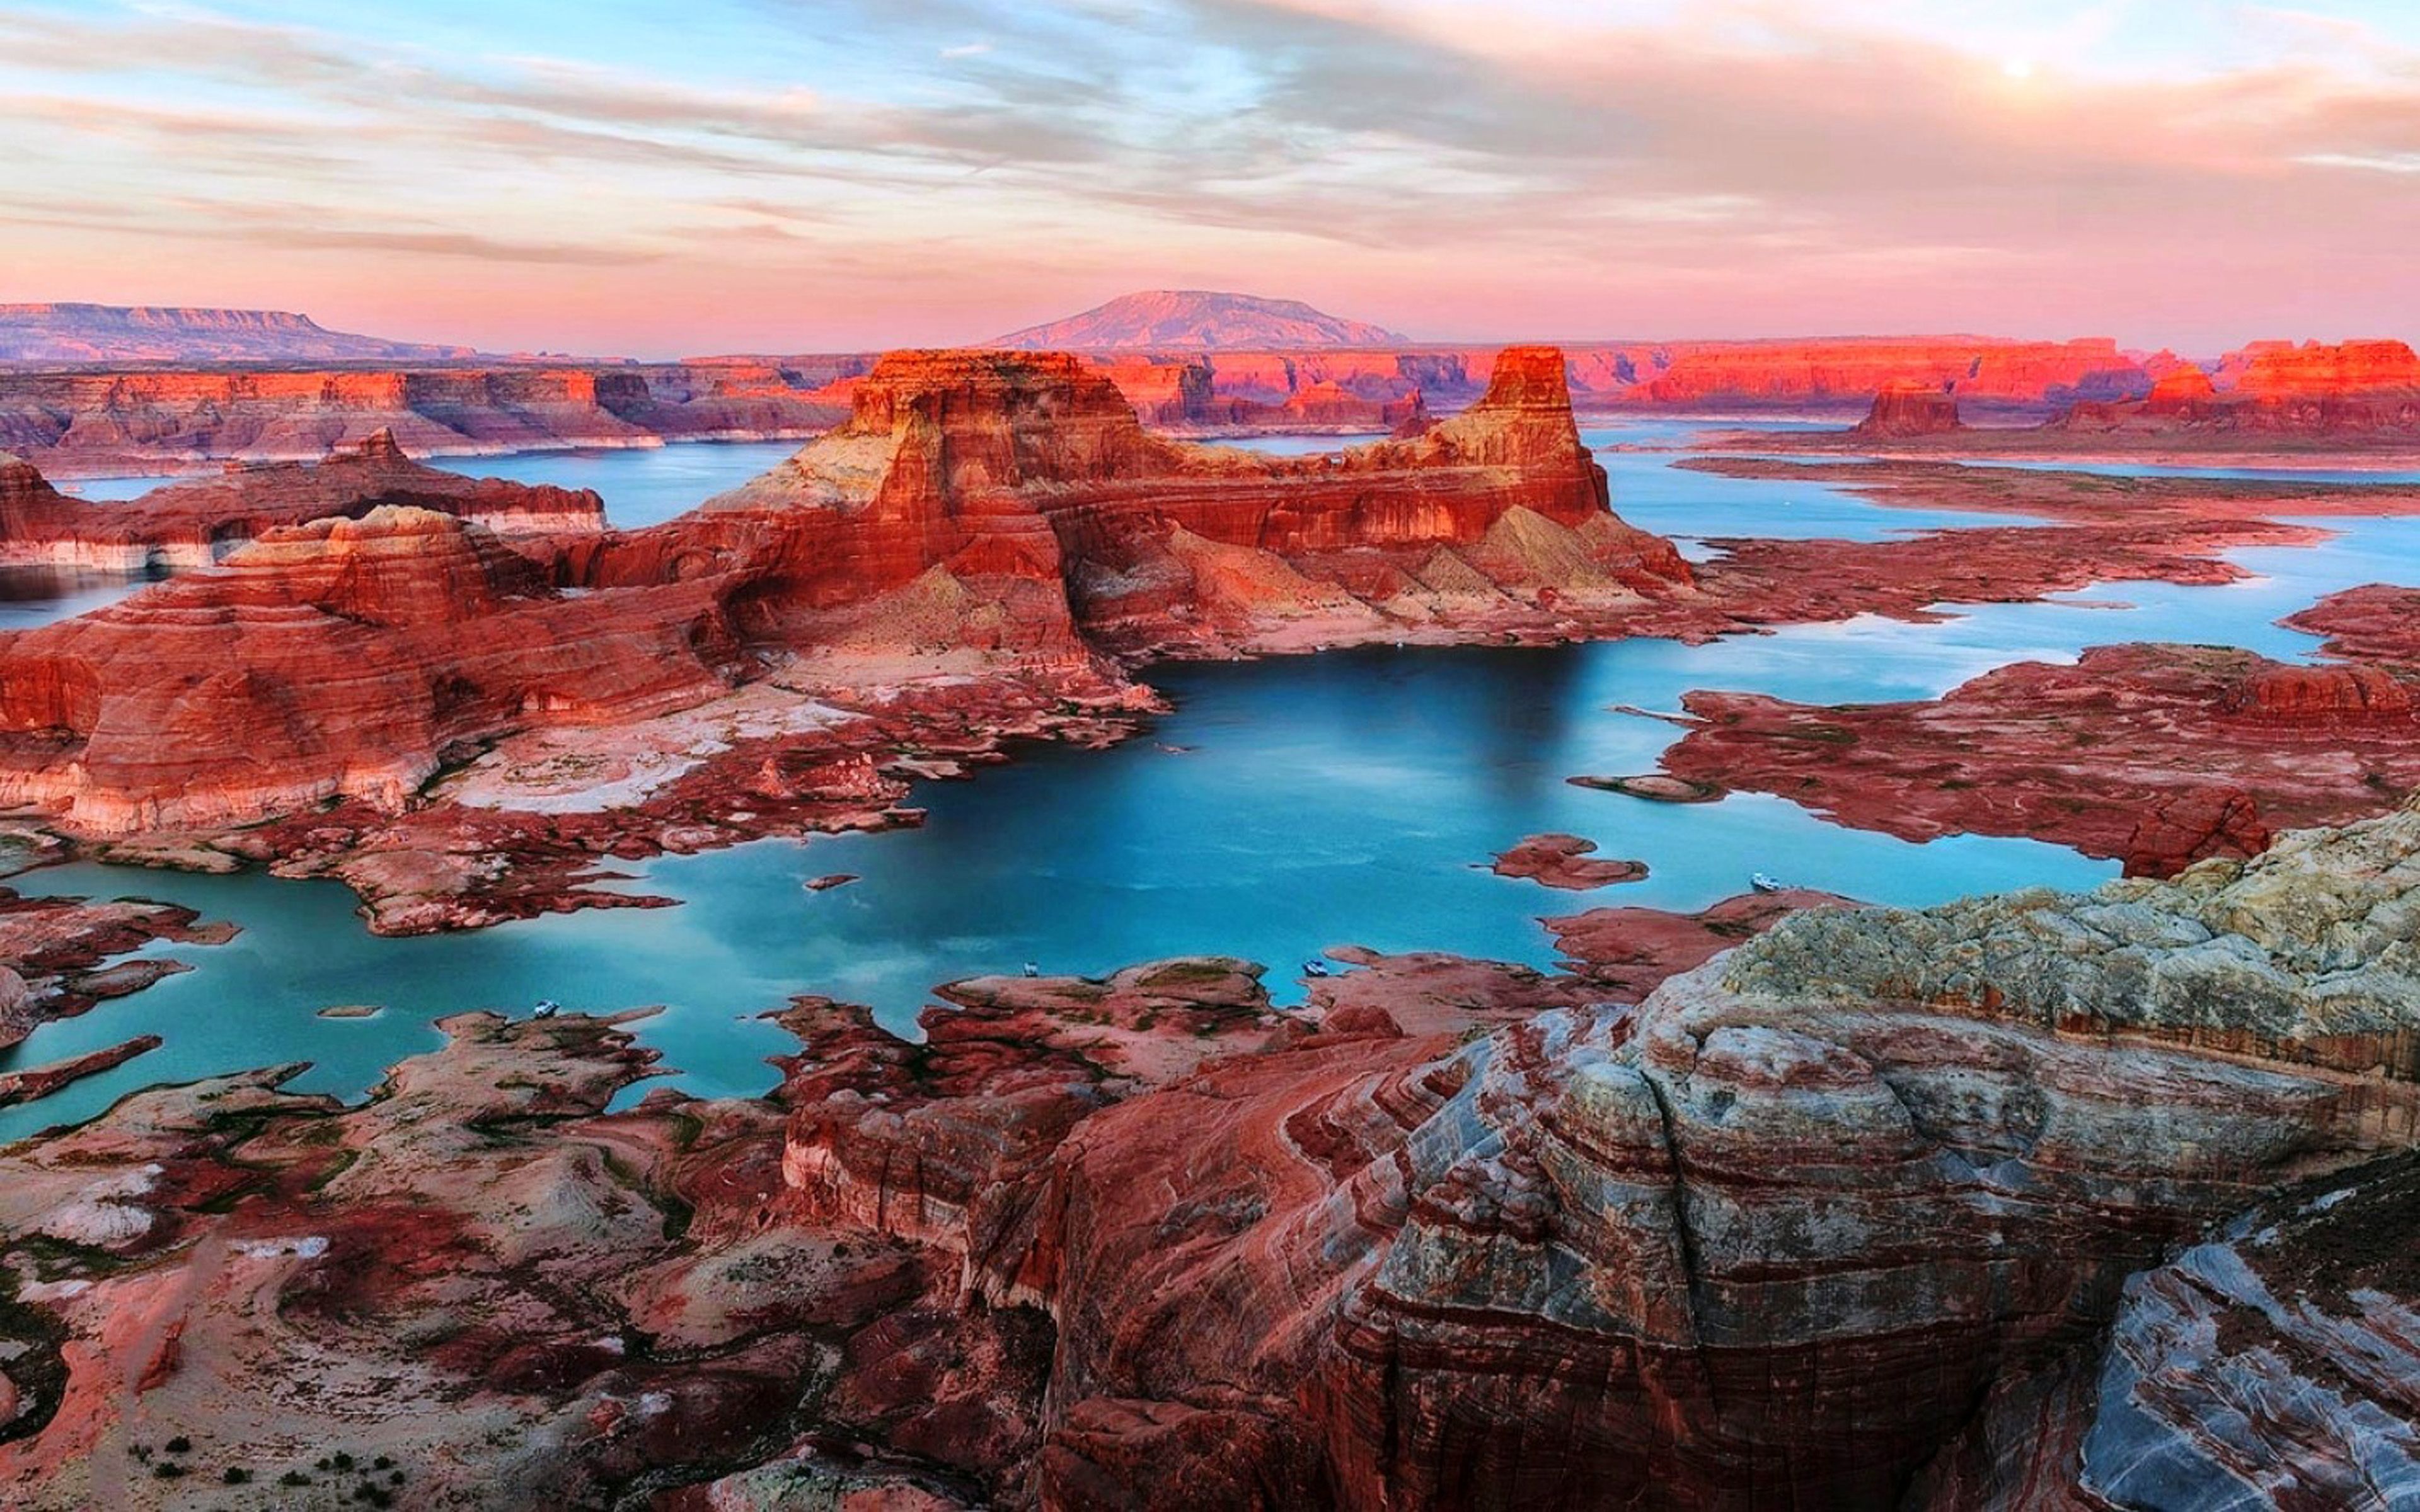 Lake Powell And Utah And Arizona In The United States Of America 4k Ultra Hd Desktop Wallpapers For Computers Laptop Tablet And Mobile Phones 3840х2400 : Wallpapers13